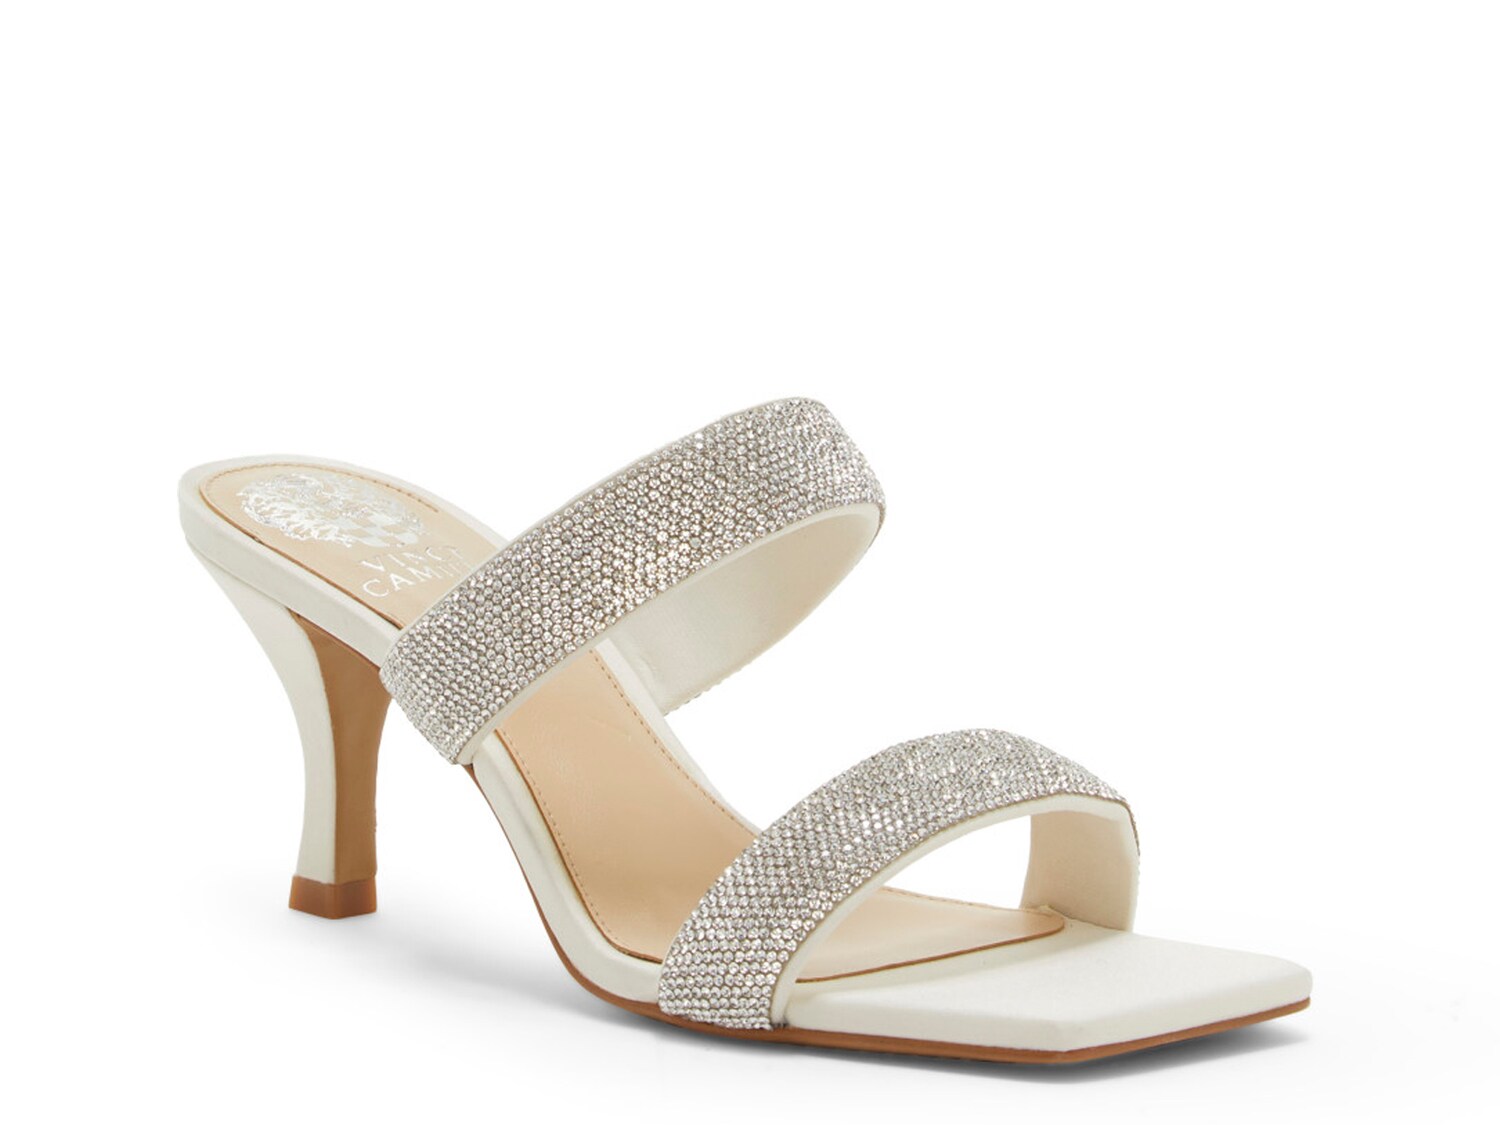 Vince Camuto Aslee 2 Sandal - Free Shipping | DSW